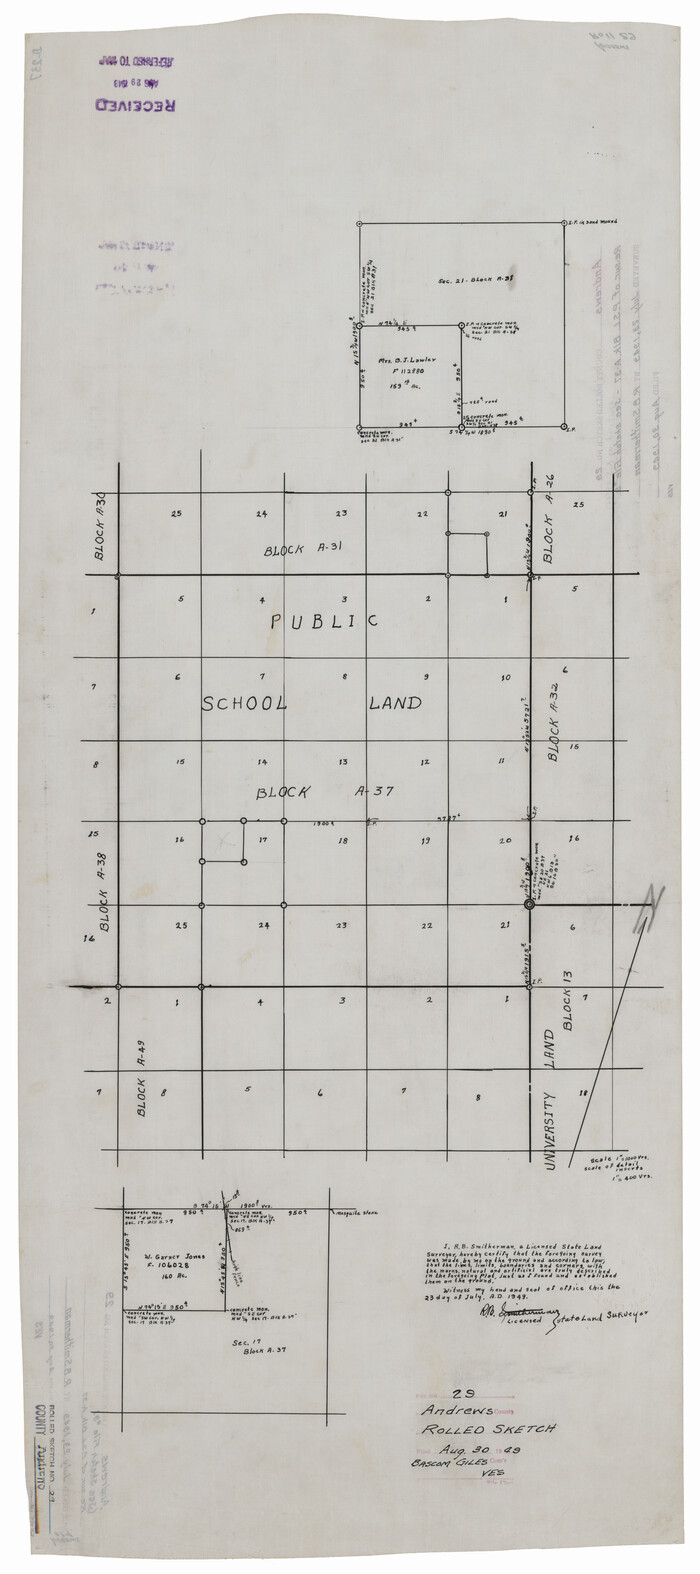 77173, Andrews County Rolled Sketch 29, General Map Collection